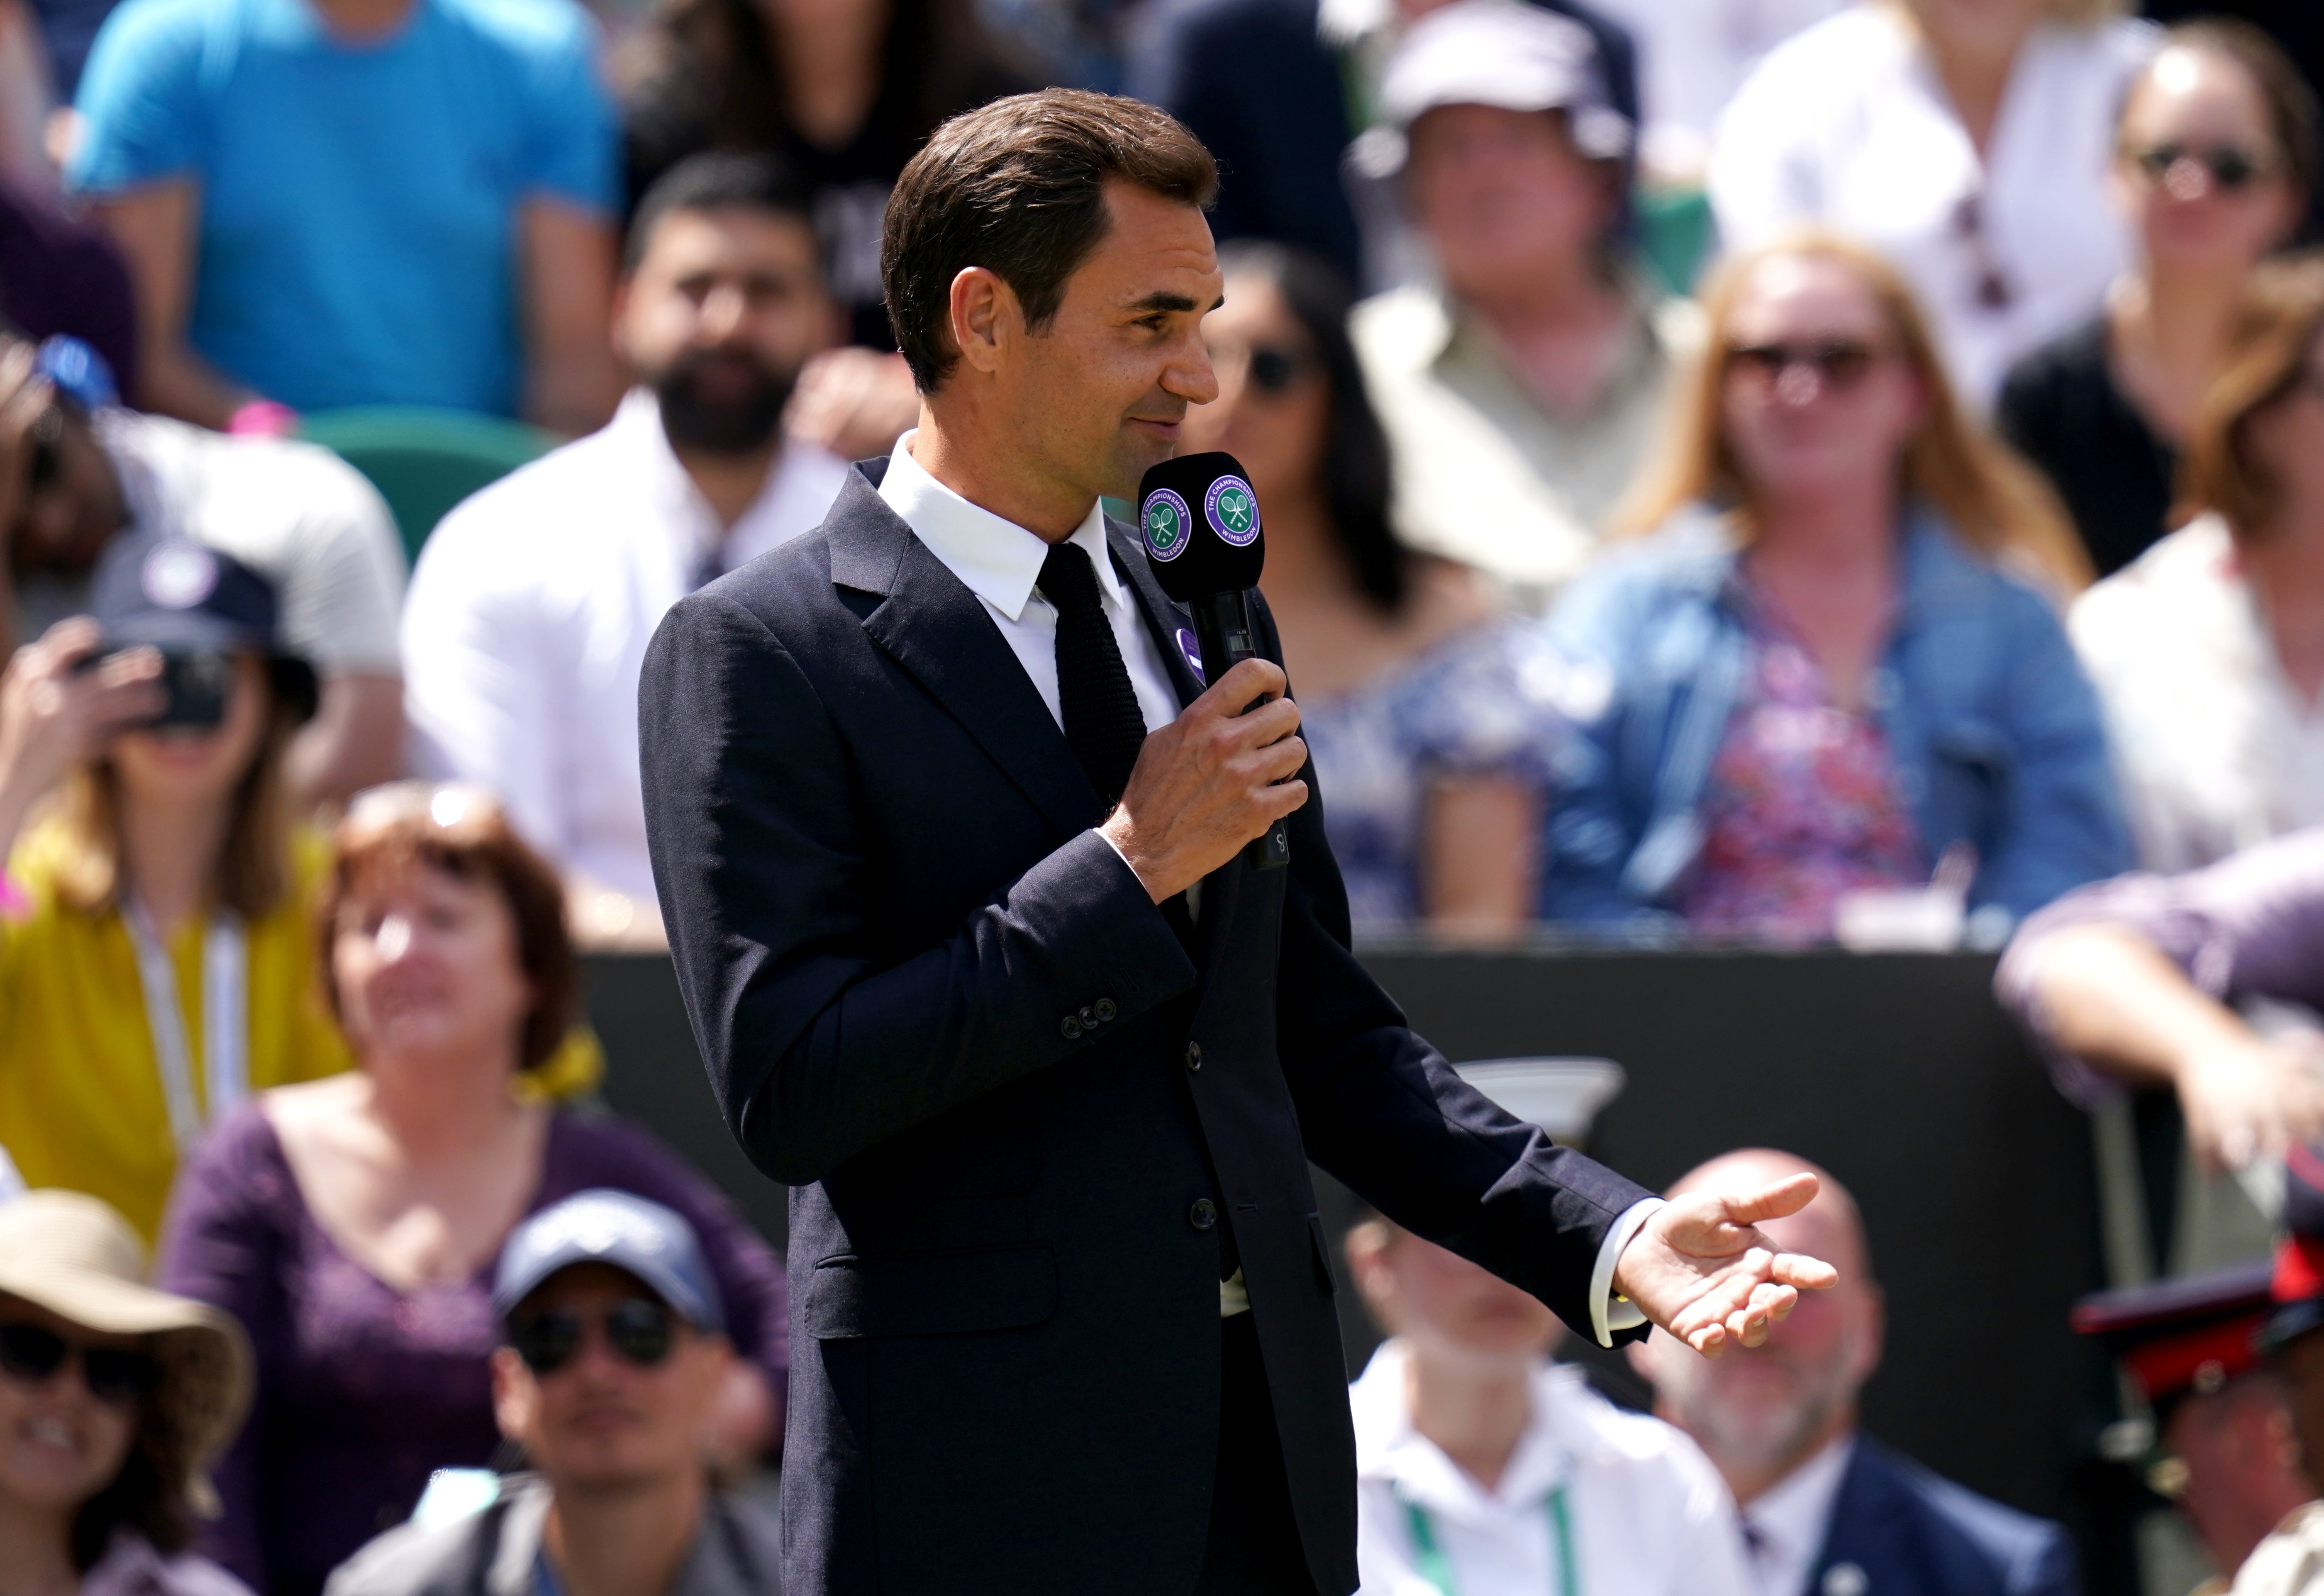 Roger Federer appeared to get the loudest ovation as he stepped out on Centre Court again (John Walton/PA)